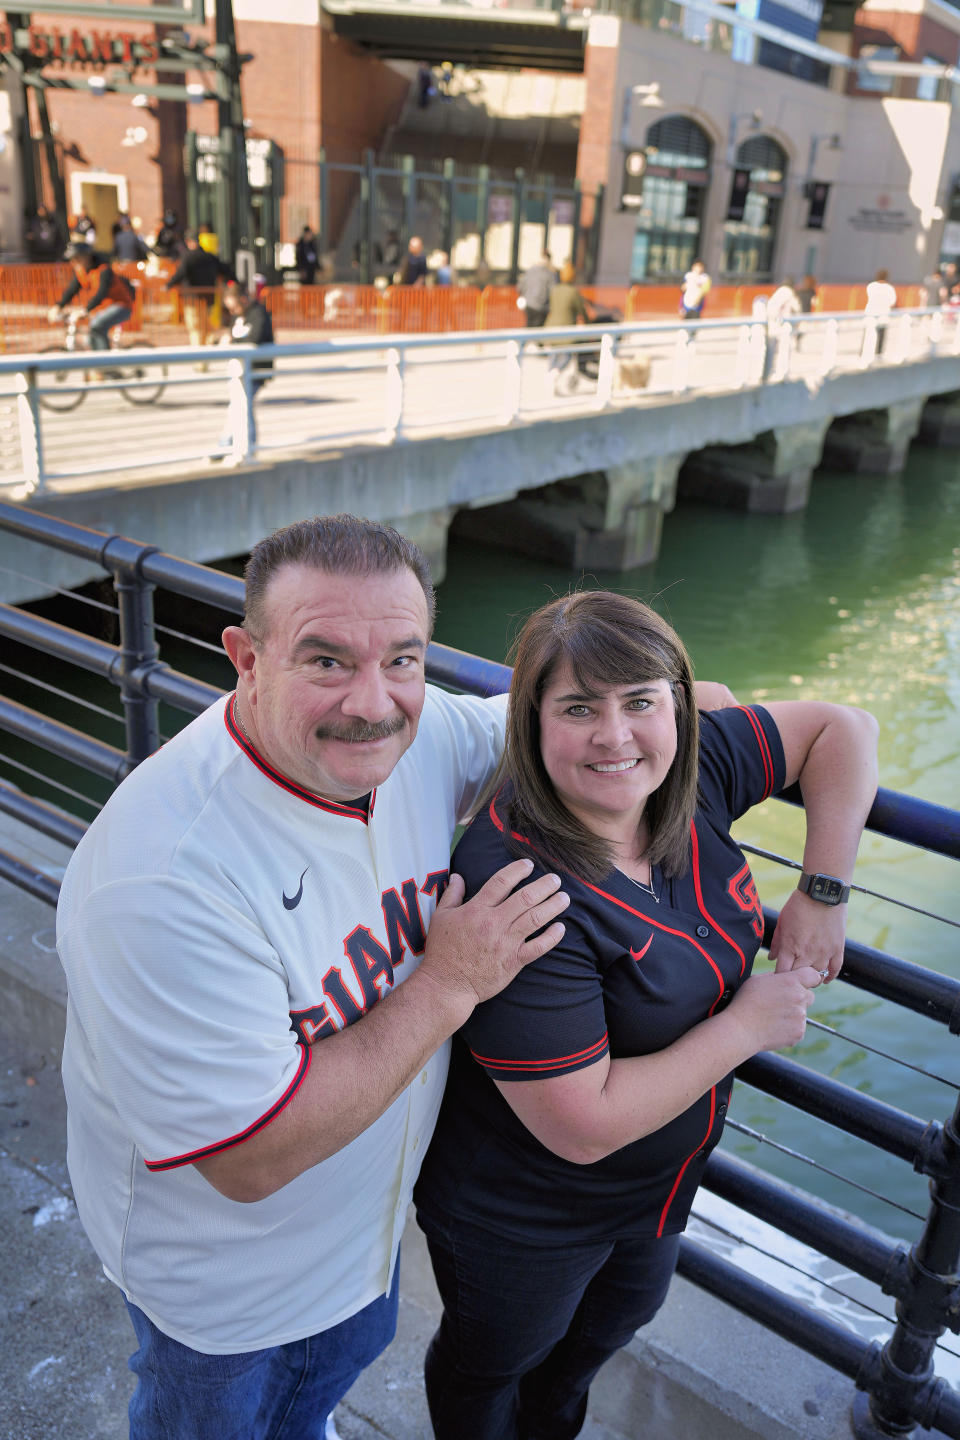 Dan and Tiffany Fuentes, a family that hosted minor league player Tristan Beck, pose for a photo outside Oracle Park before a baseball game between the San Francisco Giants and the New York Mets on Thursday, April 20, 2023, in San Francisco. Giants pitcher Tristan Beck was called up to play his first major league baseball game on April 20. Host family programs were suspended during the coronavirus pandemic over health concerns. When minor league players reached a historic initial collective bargaining agreement with Major League Baseball in March, the league agreed to double salaries and provide guaranteed housing to most players. The use of host families was officially outlawed. (AP Photo/Tony Avelar)